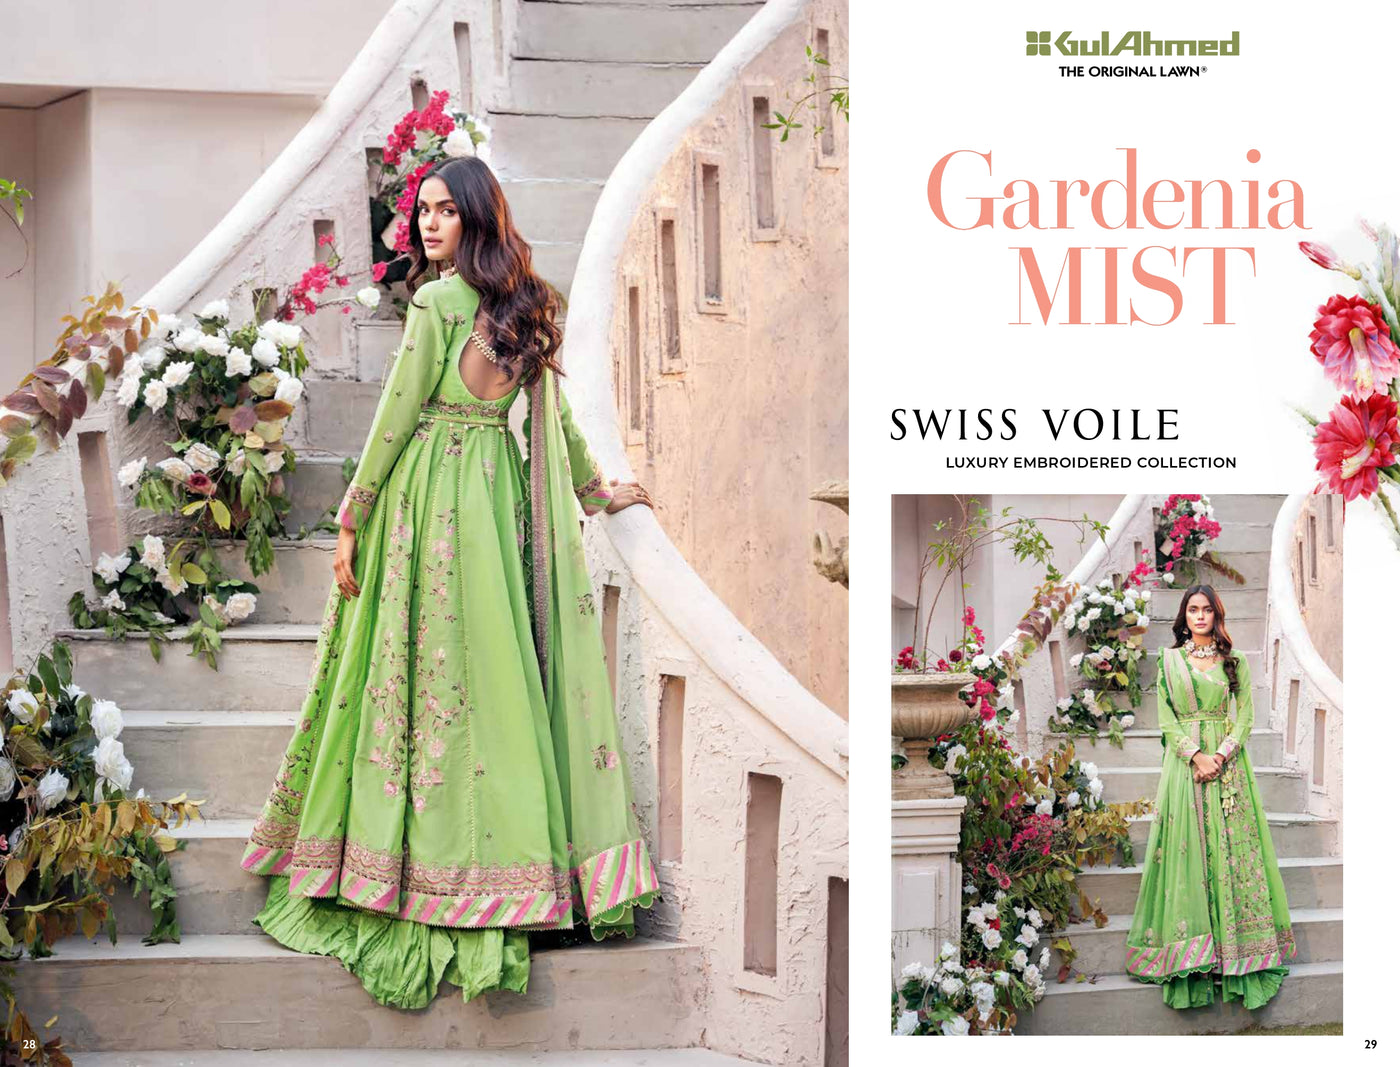 Gul Ahmed Gardenia Mist Swiss voile Luxury Embroidered Collection 2021